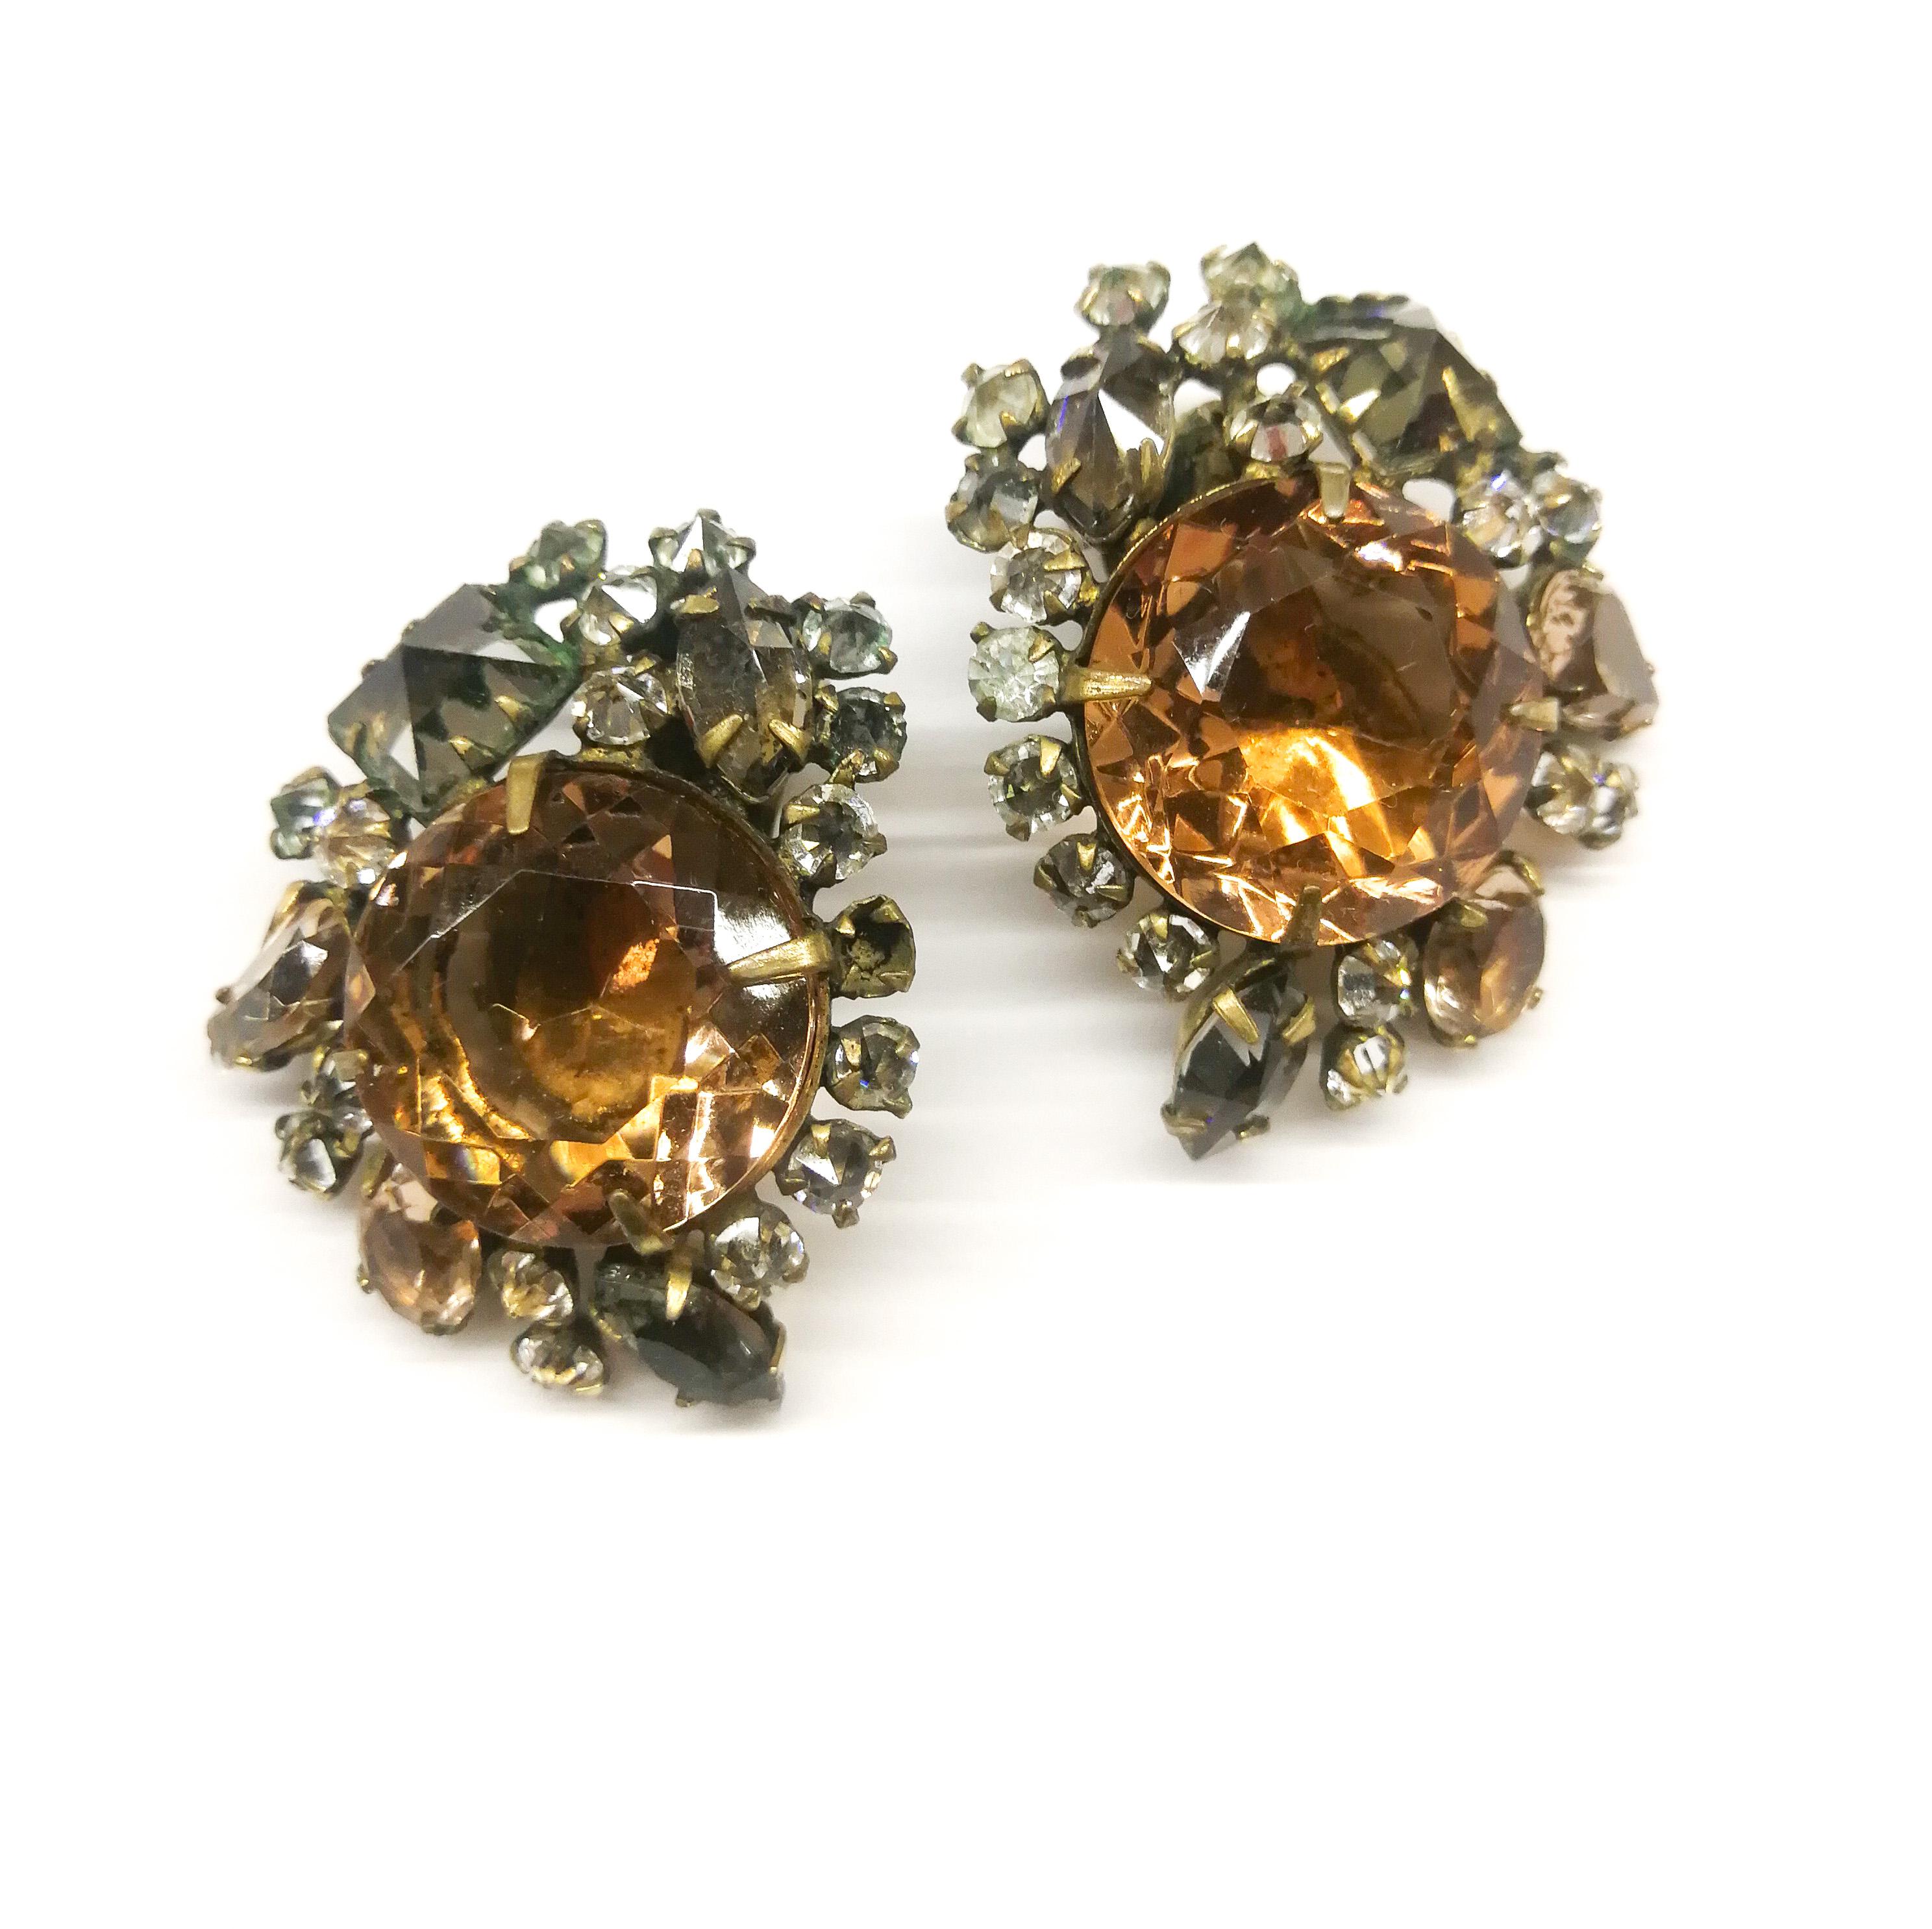 A classic design in a very elegant colour combination from Schreiner of New York - sadly these earrings are unsigned, but are a well known and popular design from the New York manufacturer of always striking and glamourous designs. The subtle